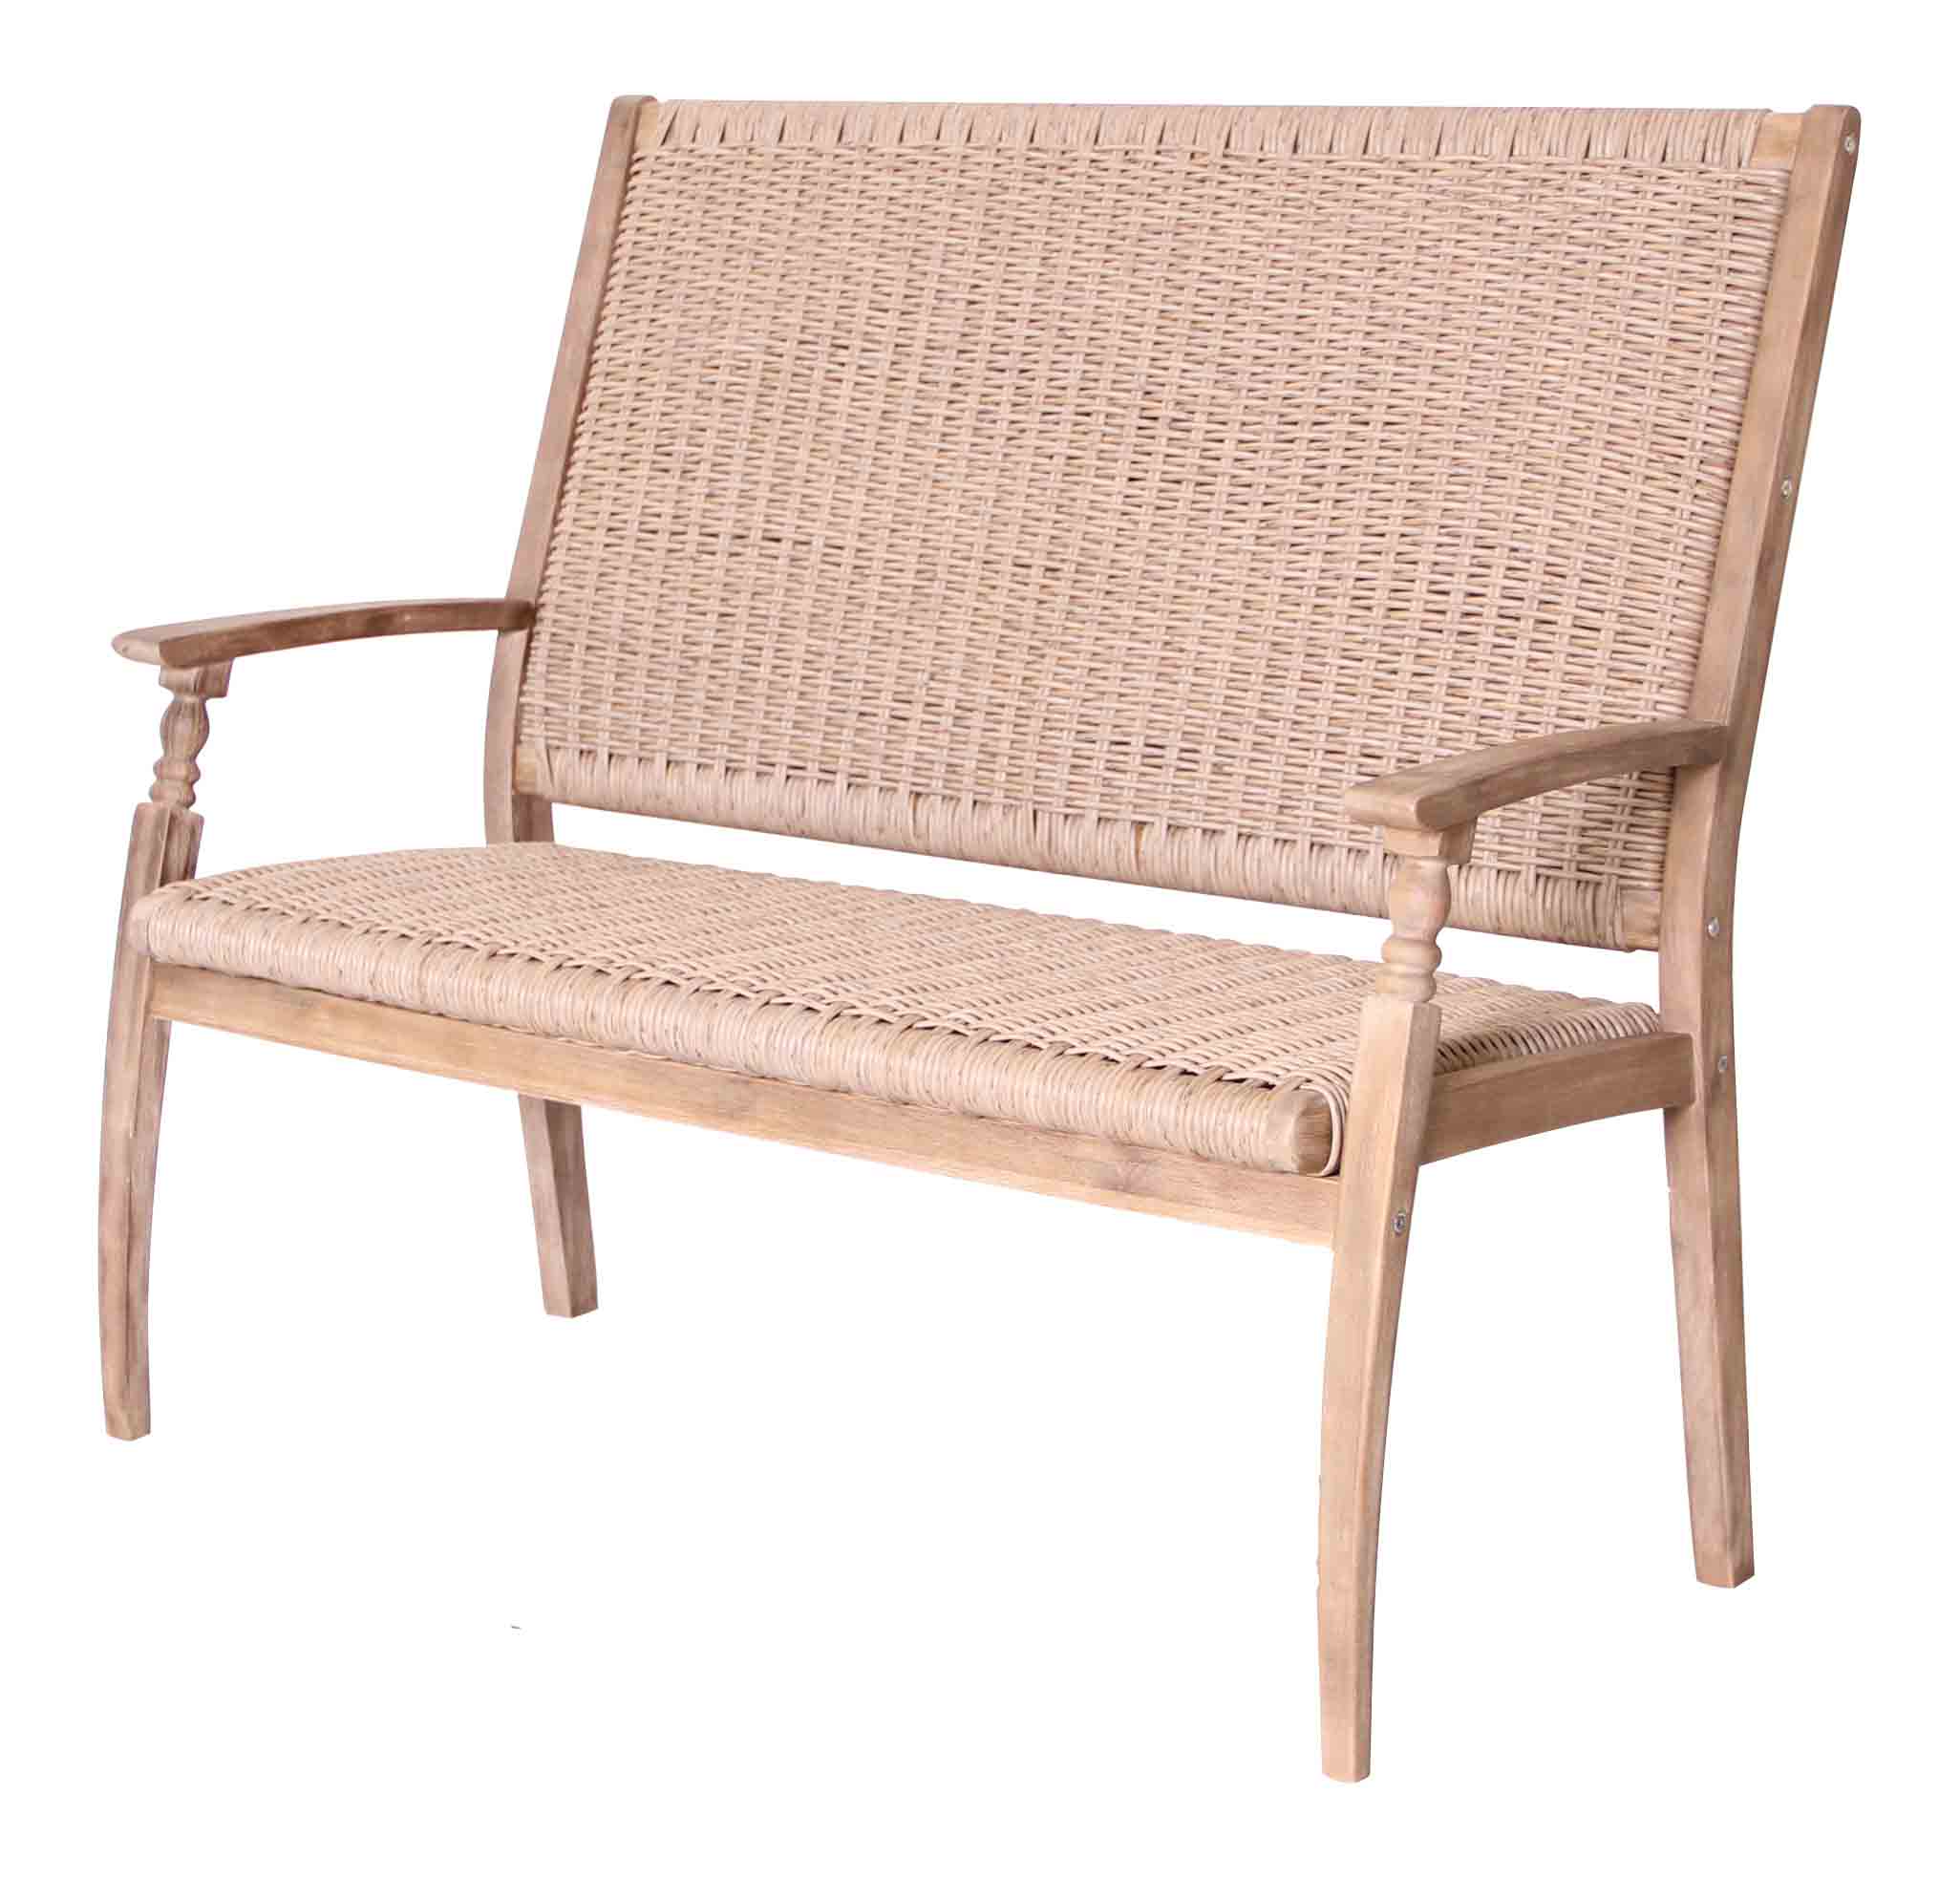 LG Outdoor Hanoi Wood Weave 2 Seat Bench Natural